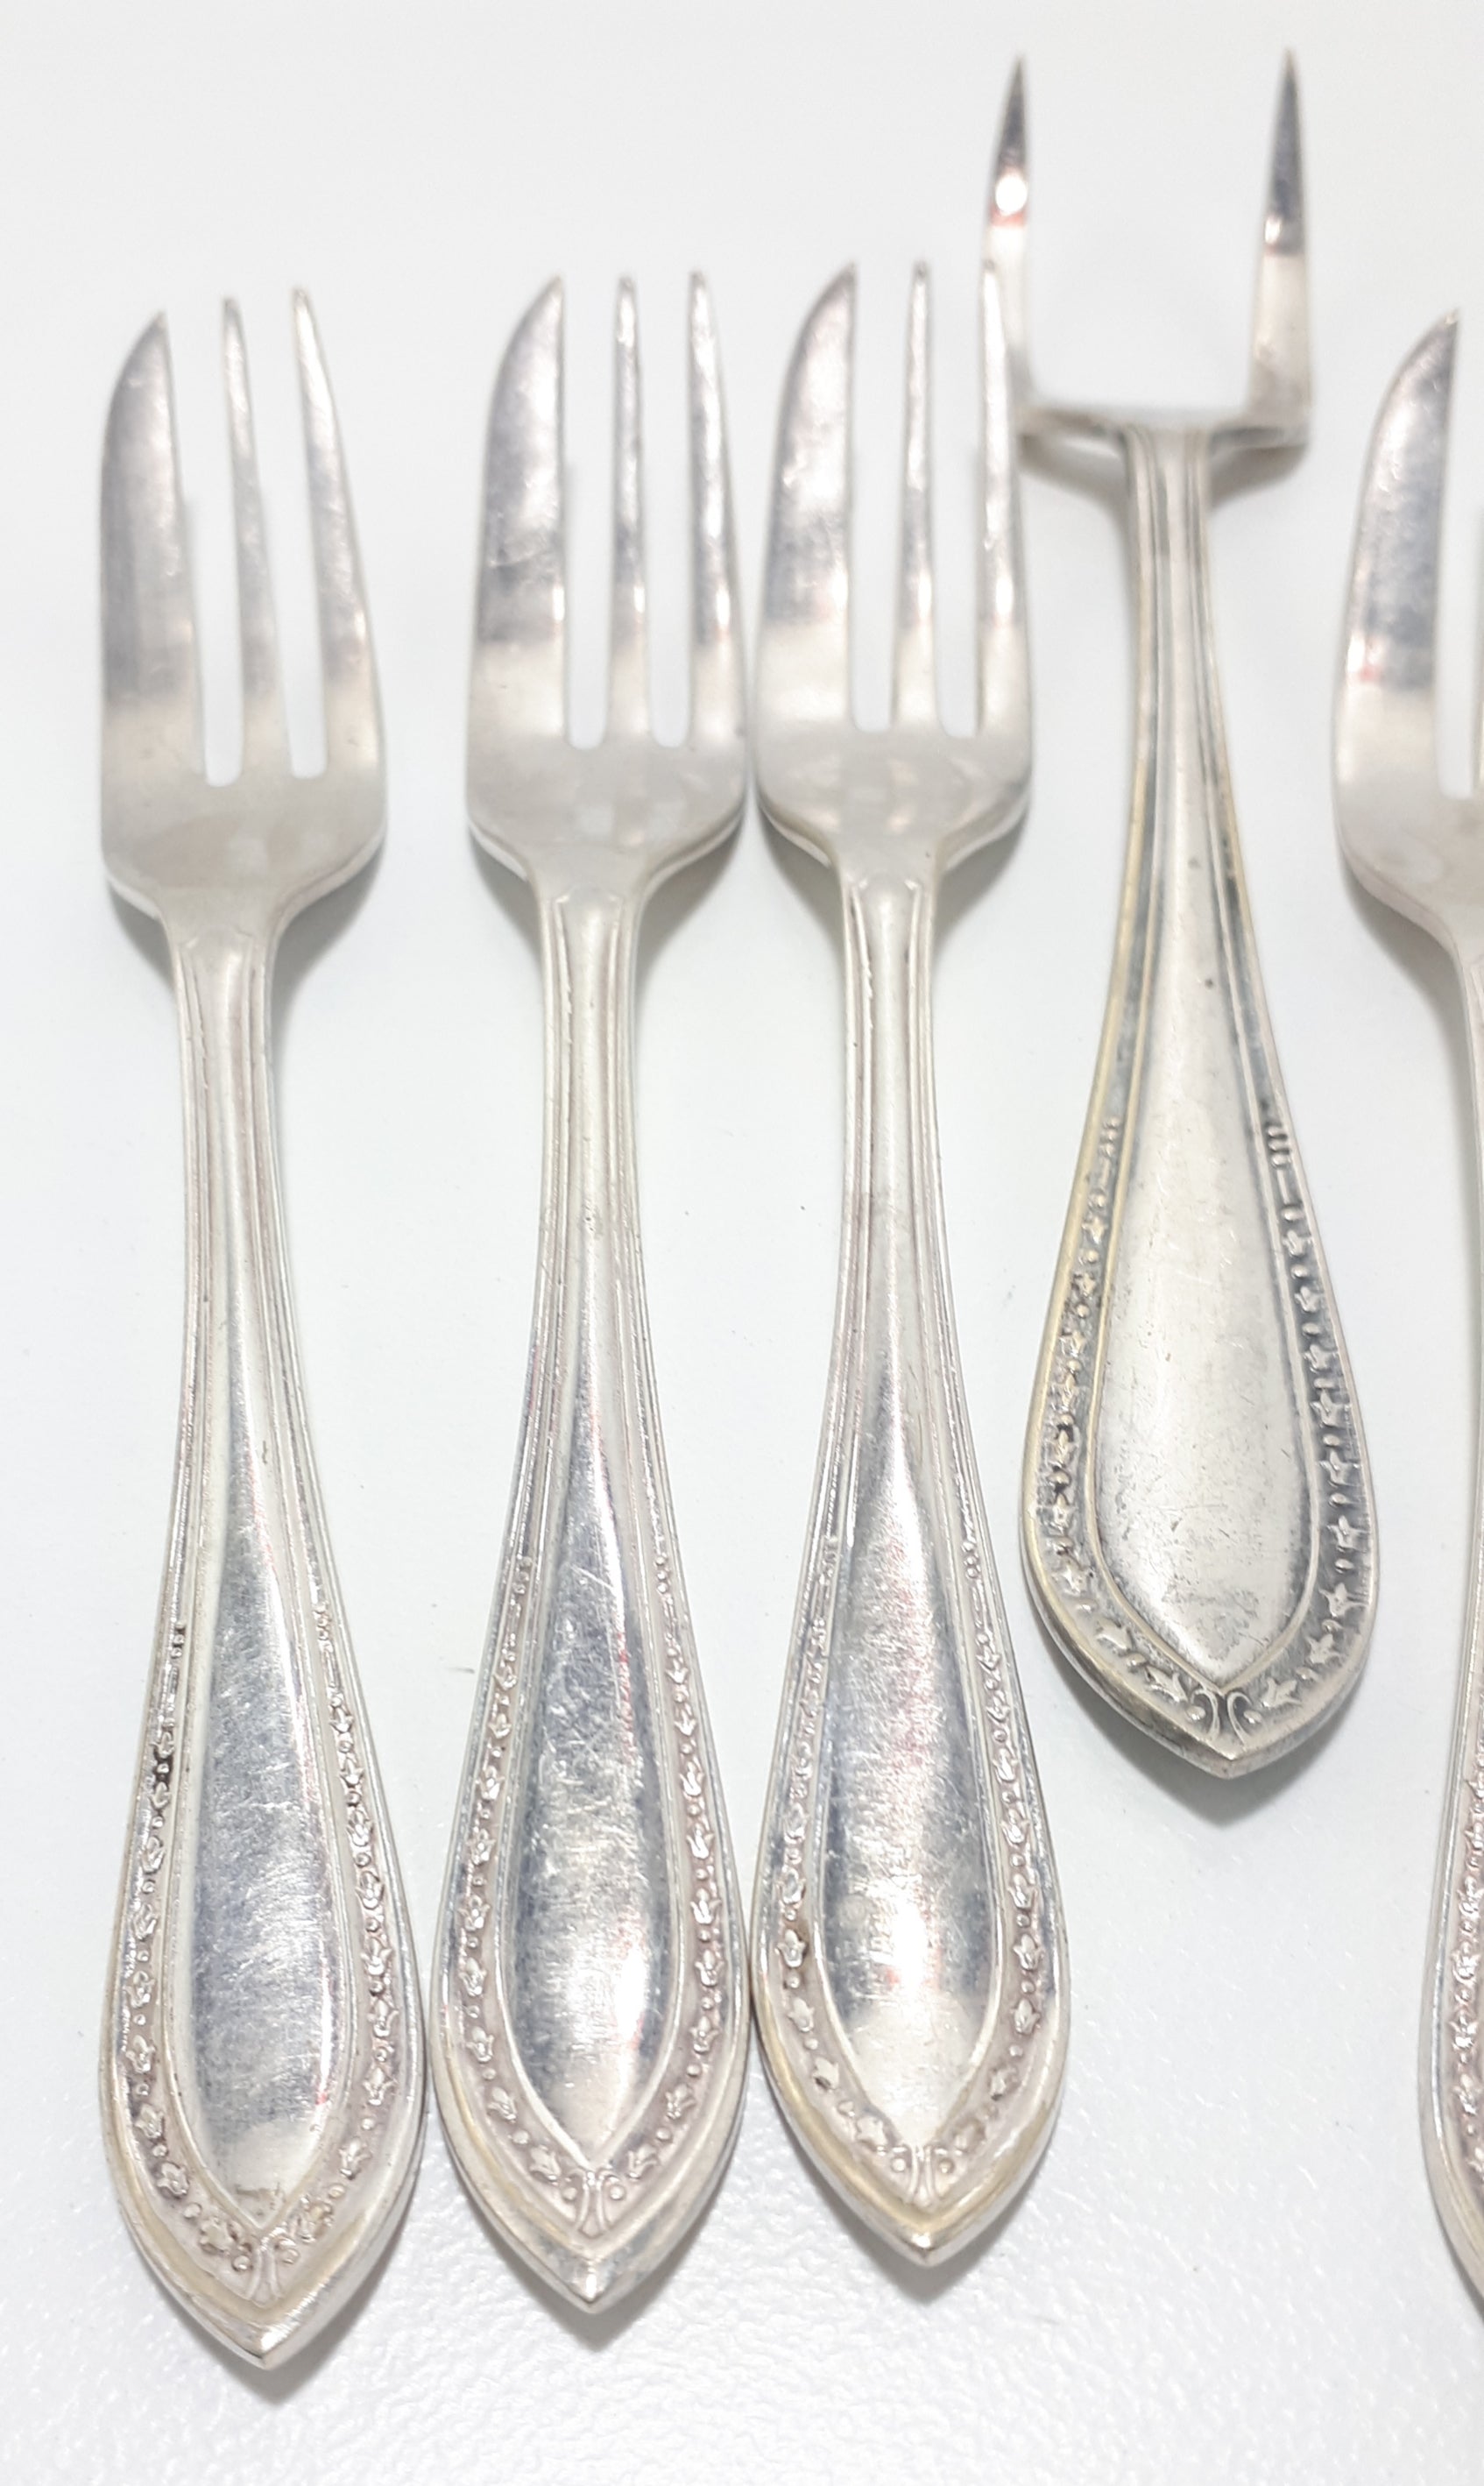 Vintage Pre 1950’s Set Of 6 Silver Plated Ell Ware, Sheffield, Cake Fork With Matching Server Fork – Countess Version Handle Design